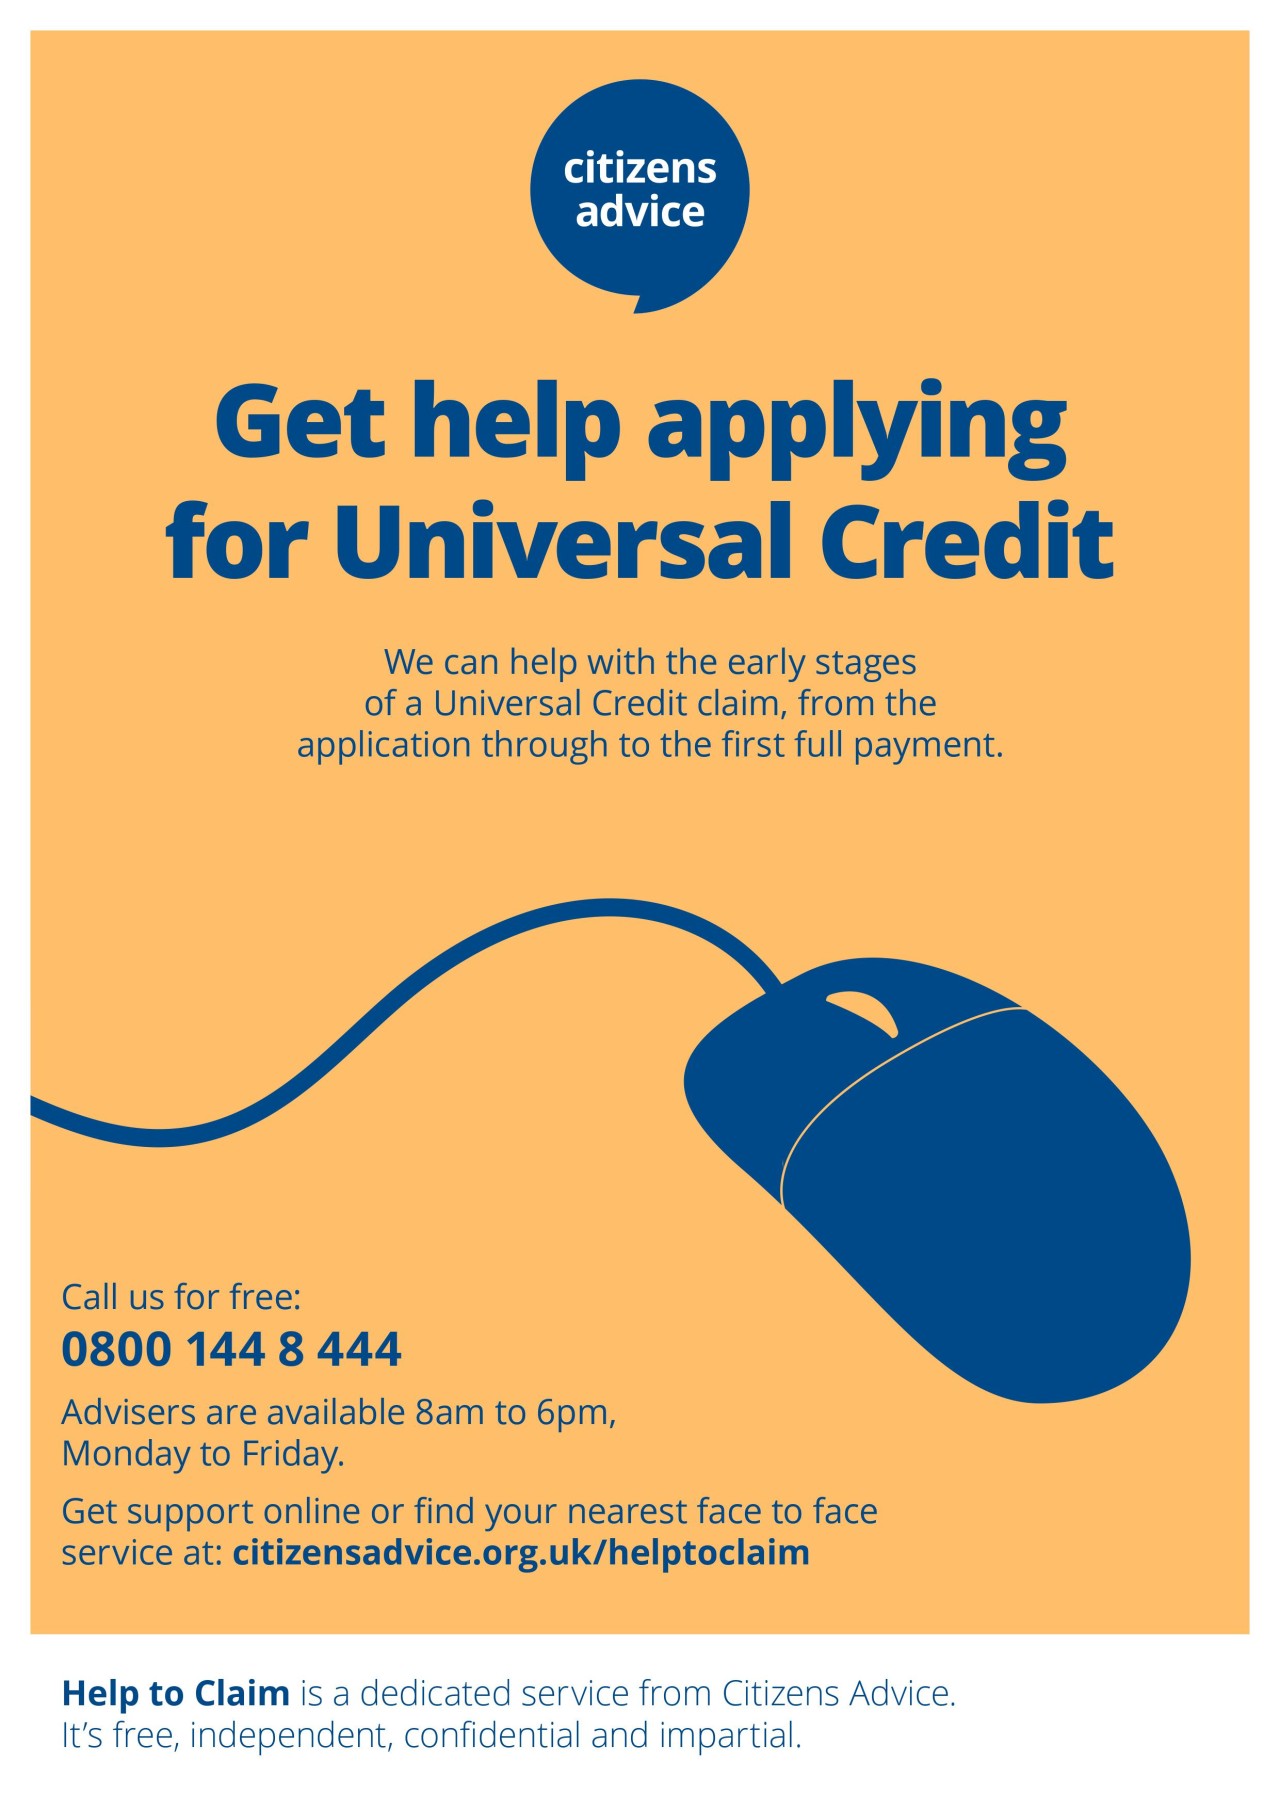 Get help applying for Universal Credit poster